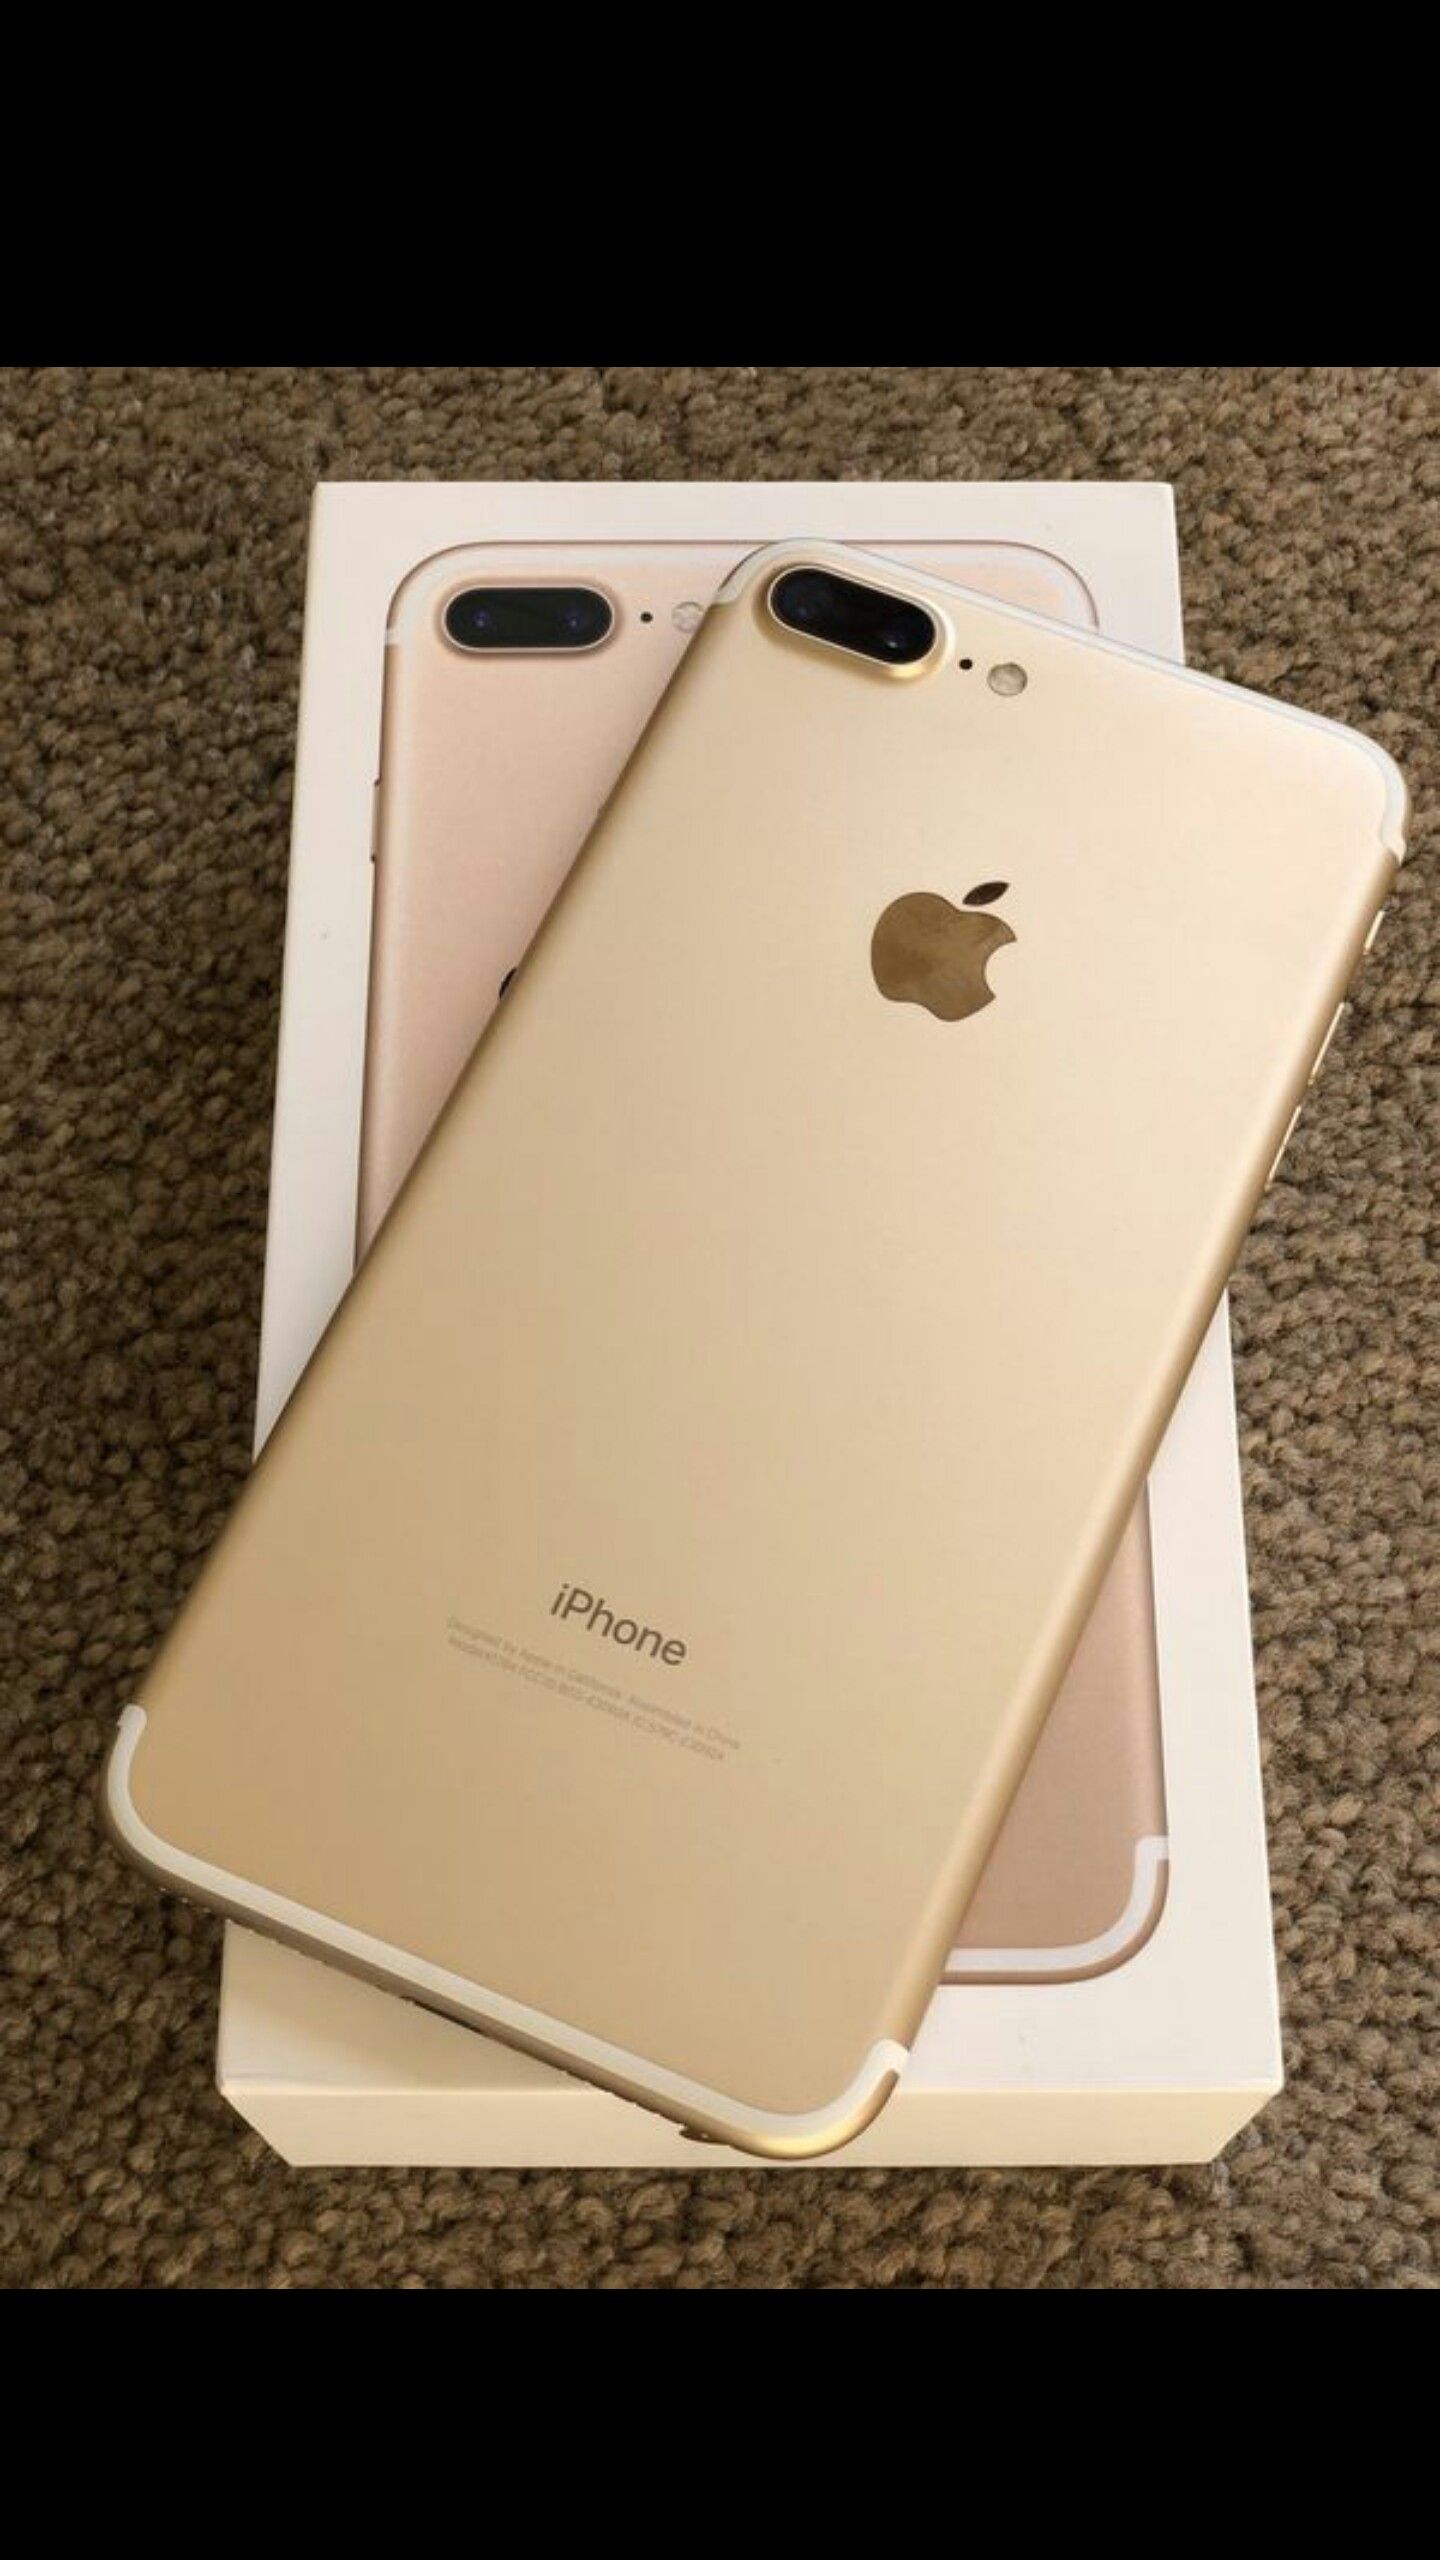 IPhone 7 Plus, 256Gb Factory UNLOCKED//Excellent Condition// As like New//Price is Negotiable